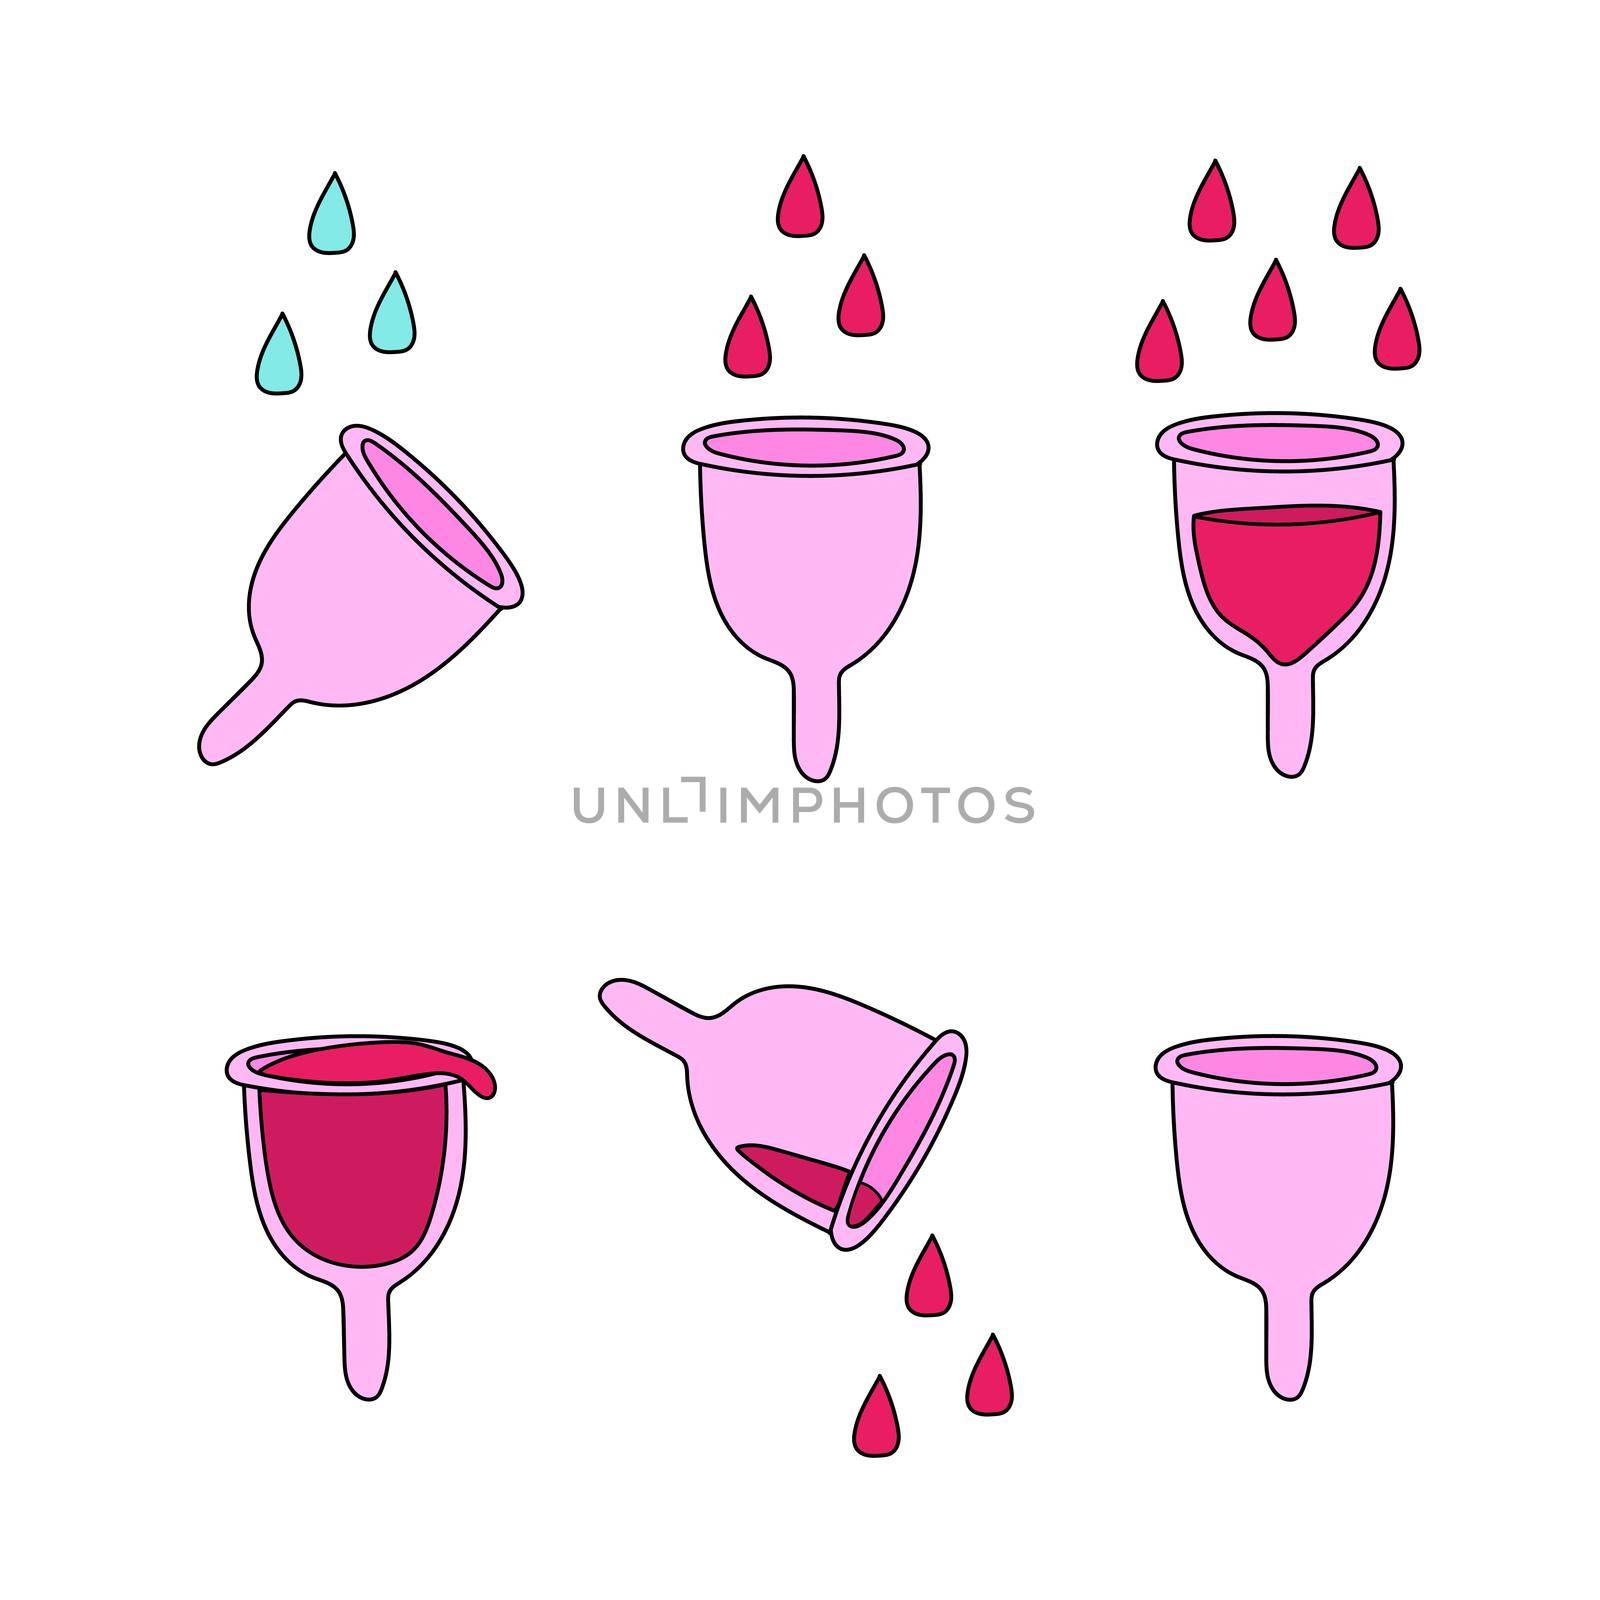 Hand drawn menstrual cups vector illustration. Icons for instructions and tutorials. Zero waste concept